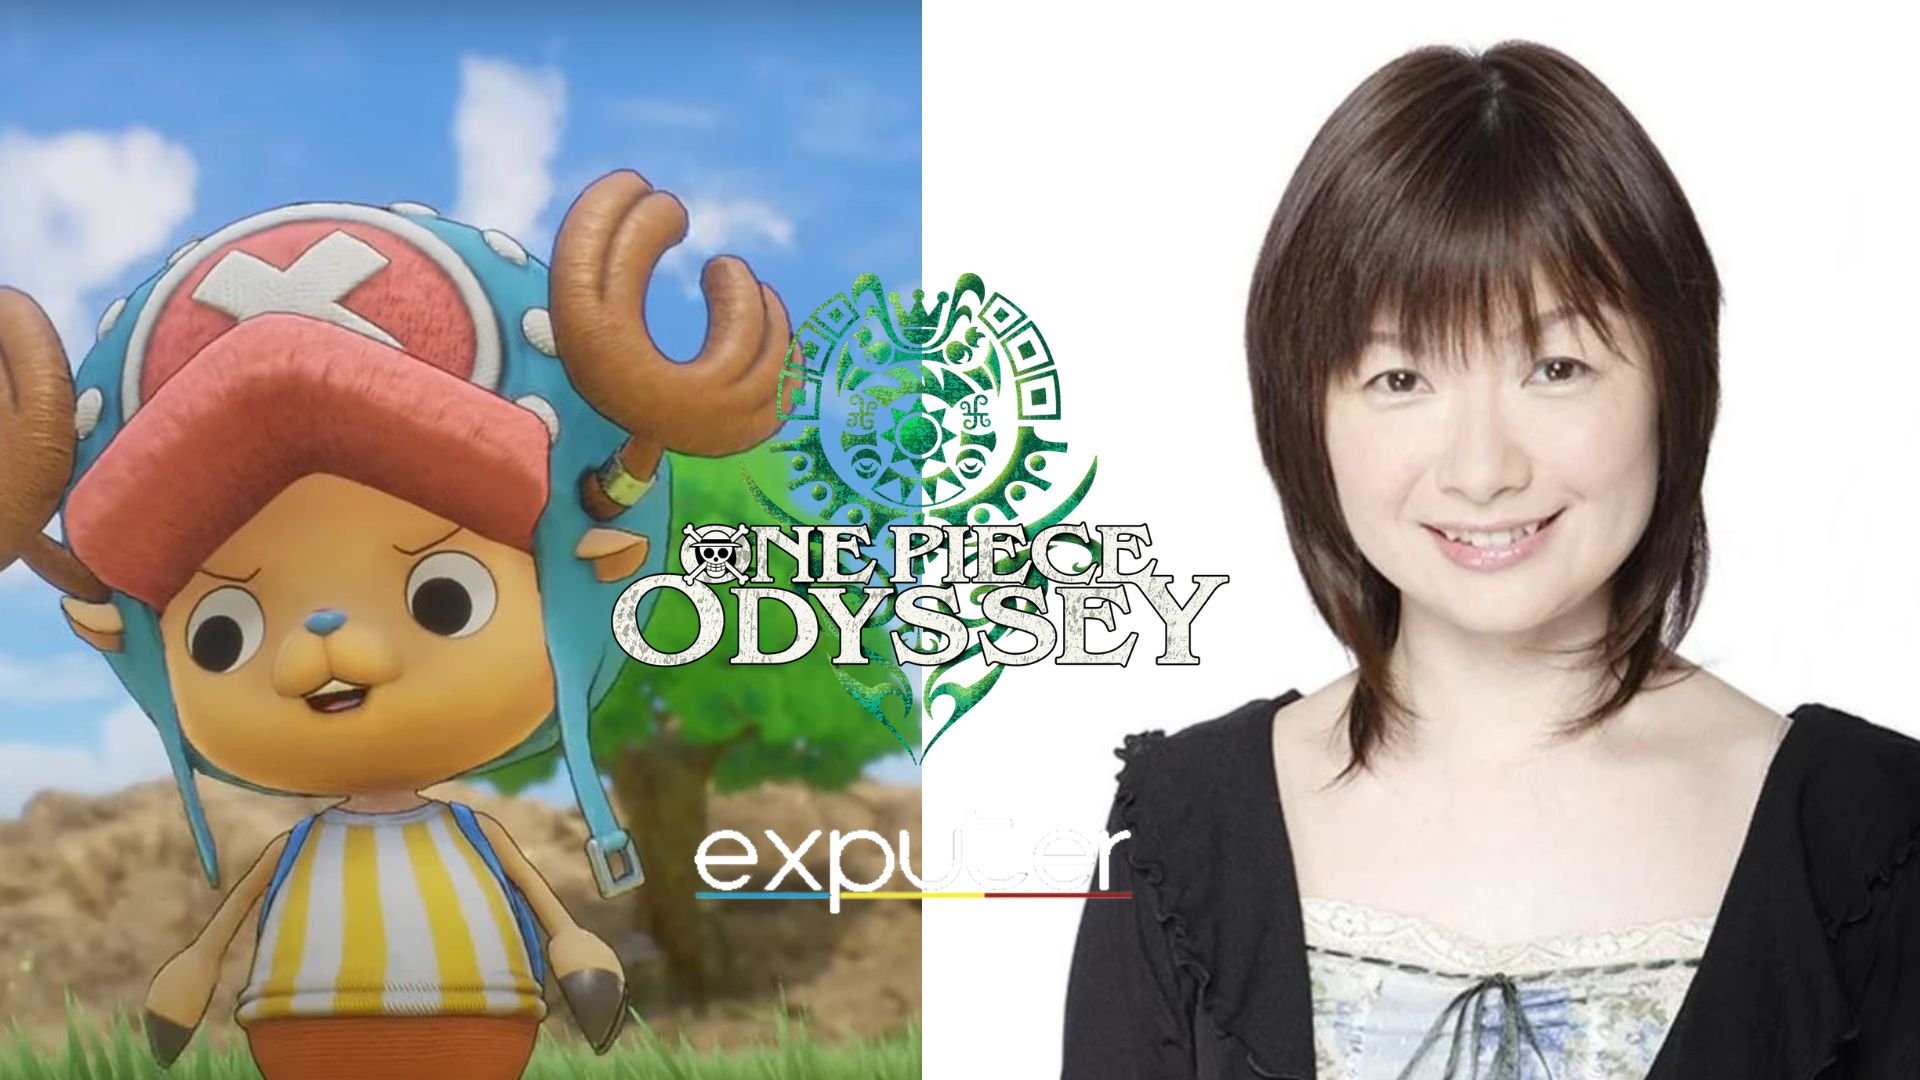 voice actor actress of Pikachu and Chopper